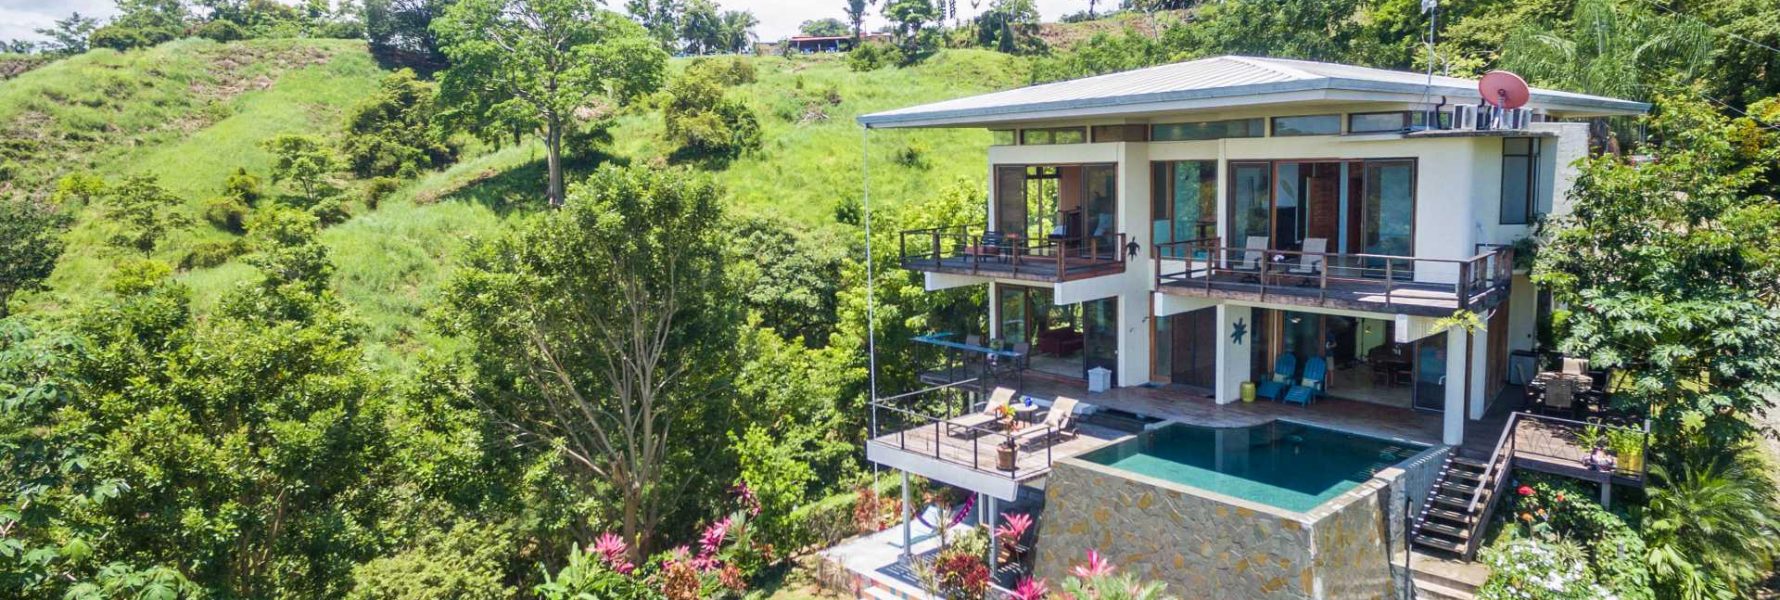 A beautiful property deep in the heart of Manuel Antonio with perfect views of the Pacific coastline and national park.